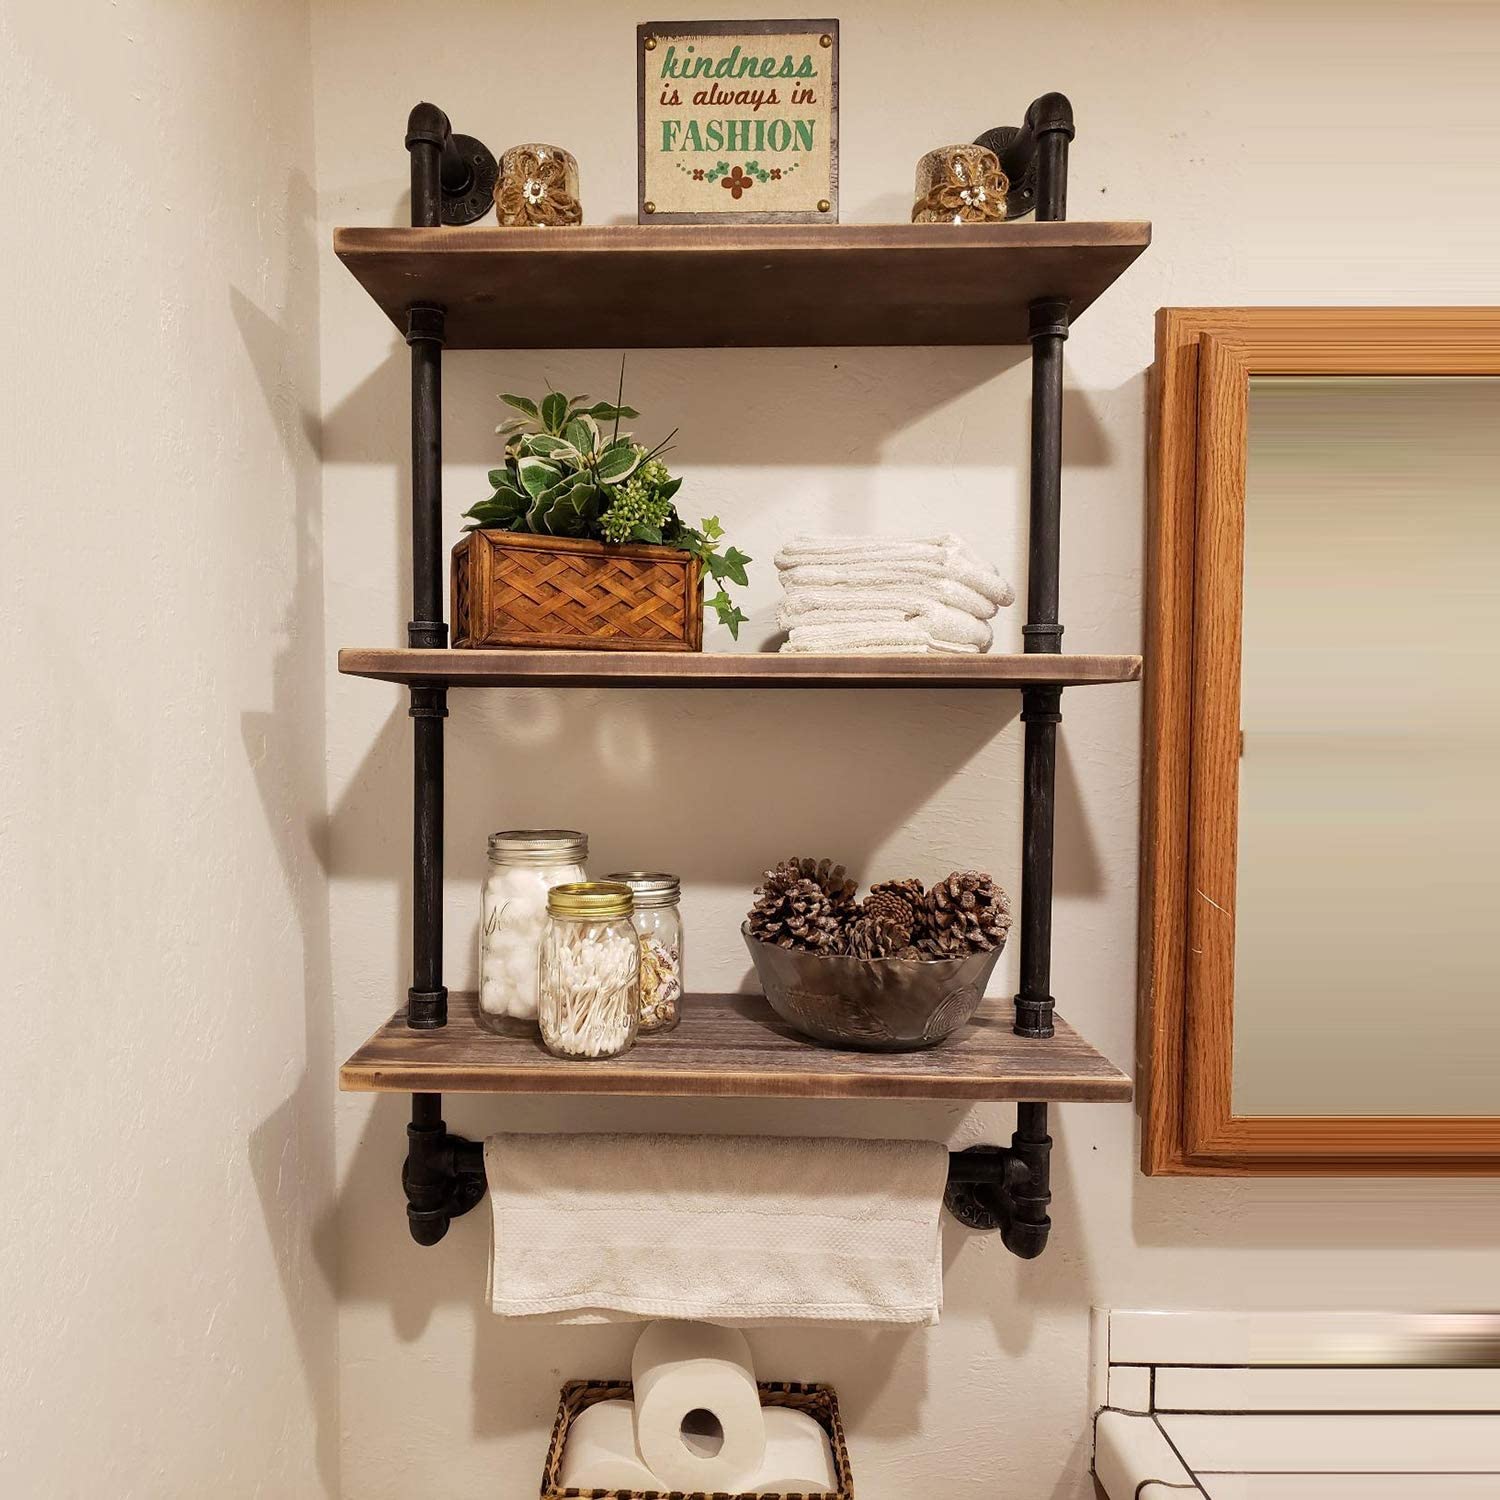 Wall shelf with industrial pipes